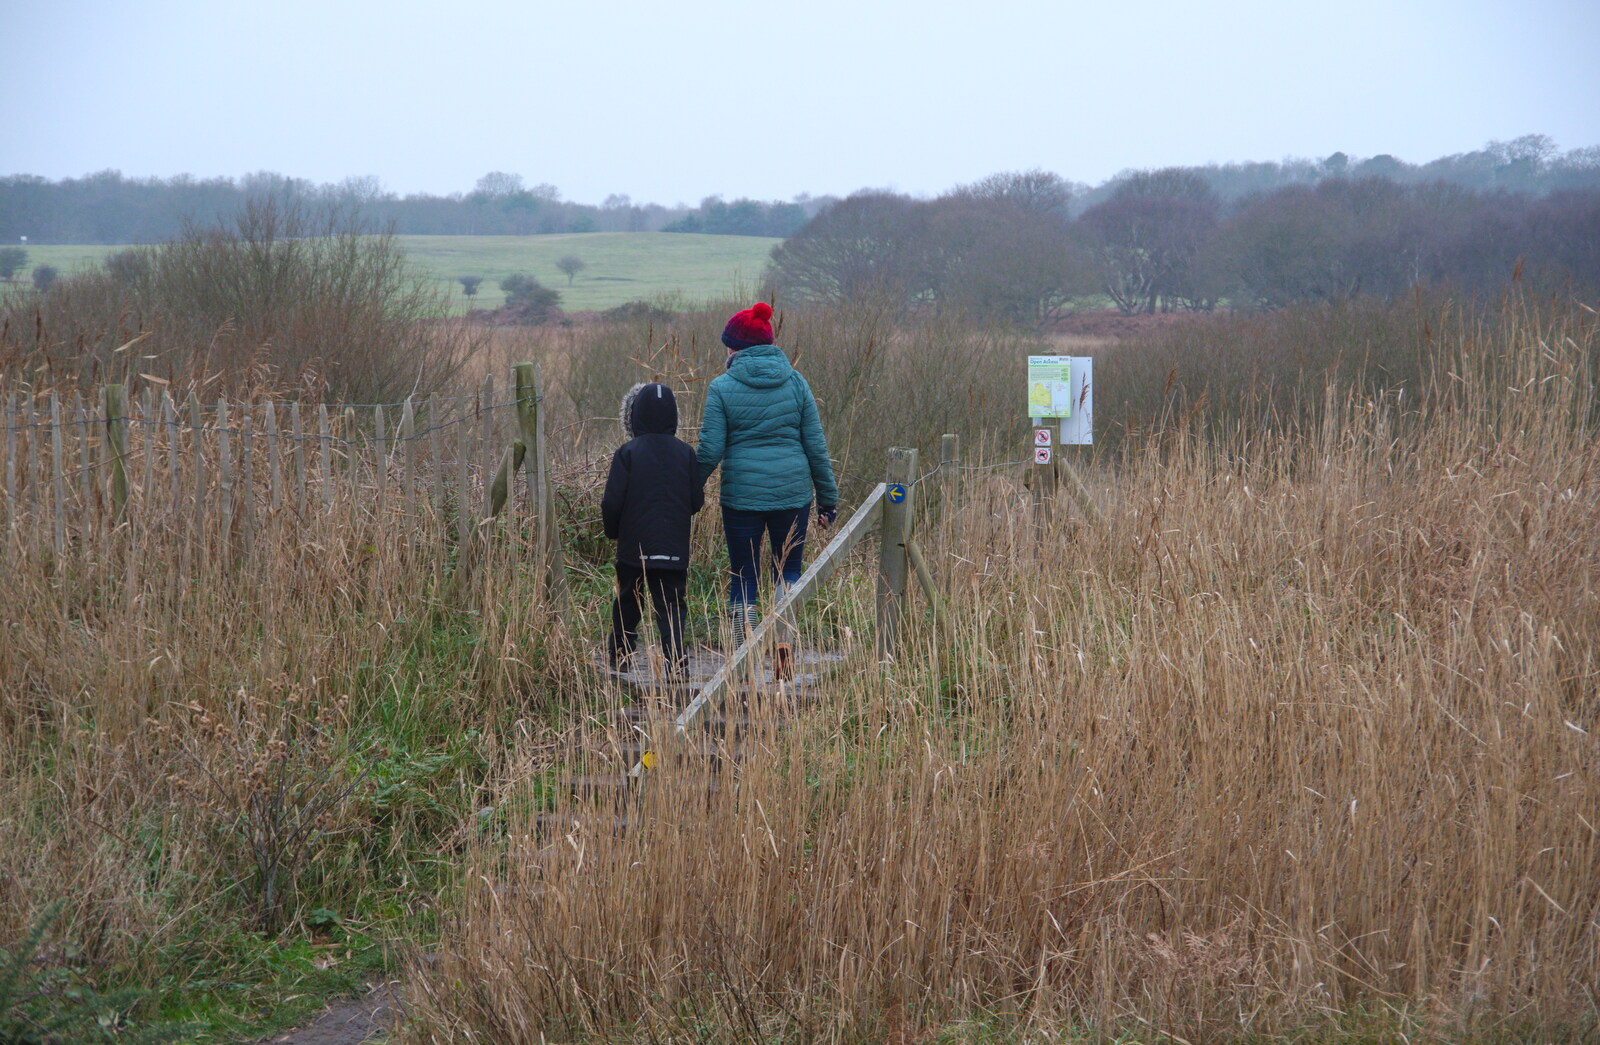 Harry and Isobel head off to the marshes from A Trip to the Beach, Dunwich Heath, Suffolk - 27th December 2019